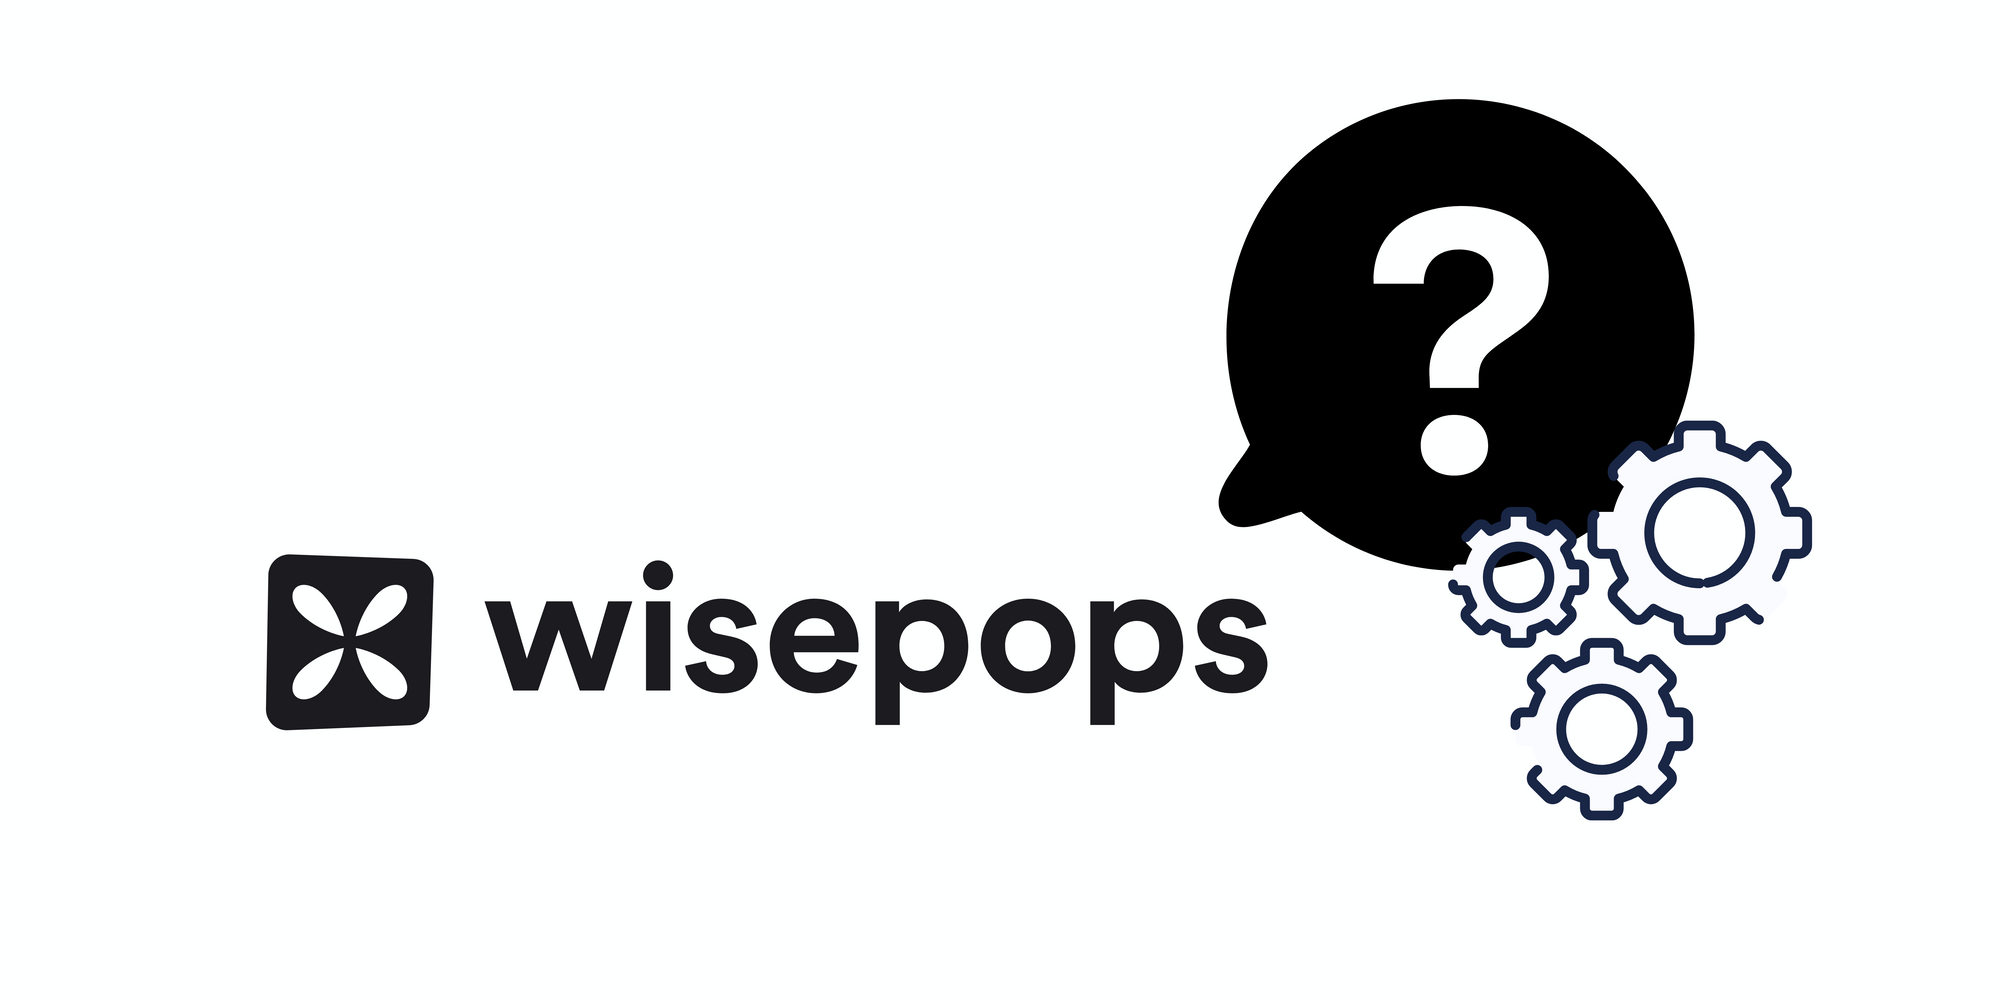 Wisepops icon, a question mark and settings icon on white background